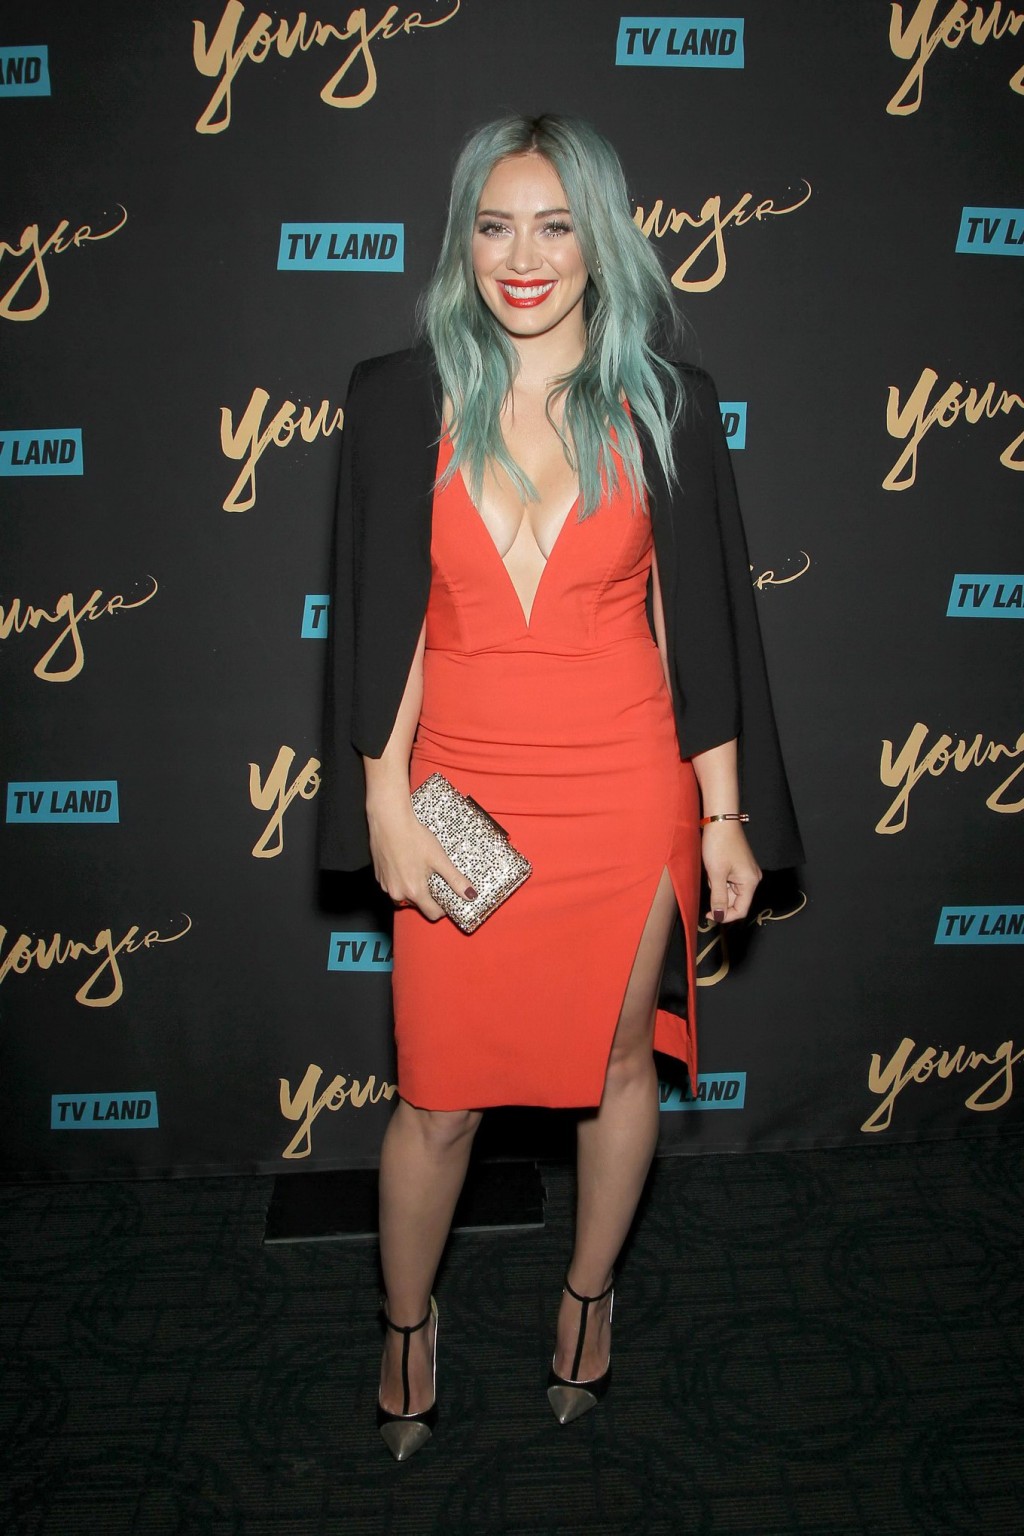 Hilary Duff showing huge cleavage braless in short red dress at the Younger prem #75168362